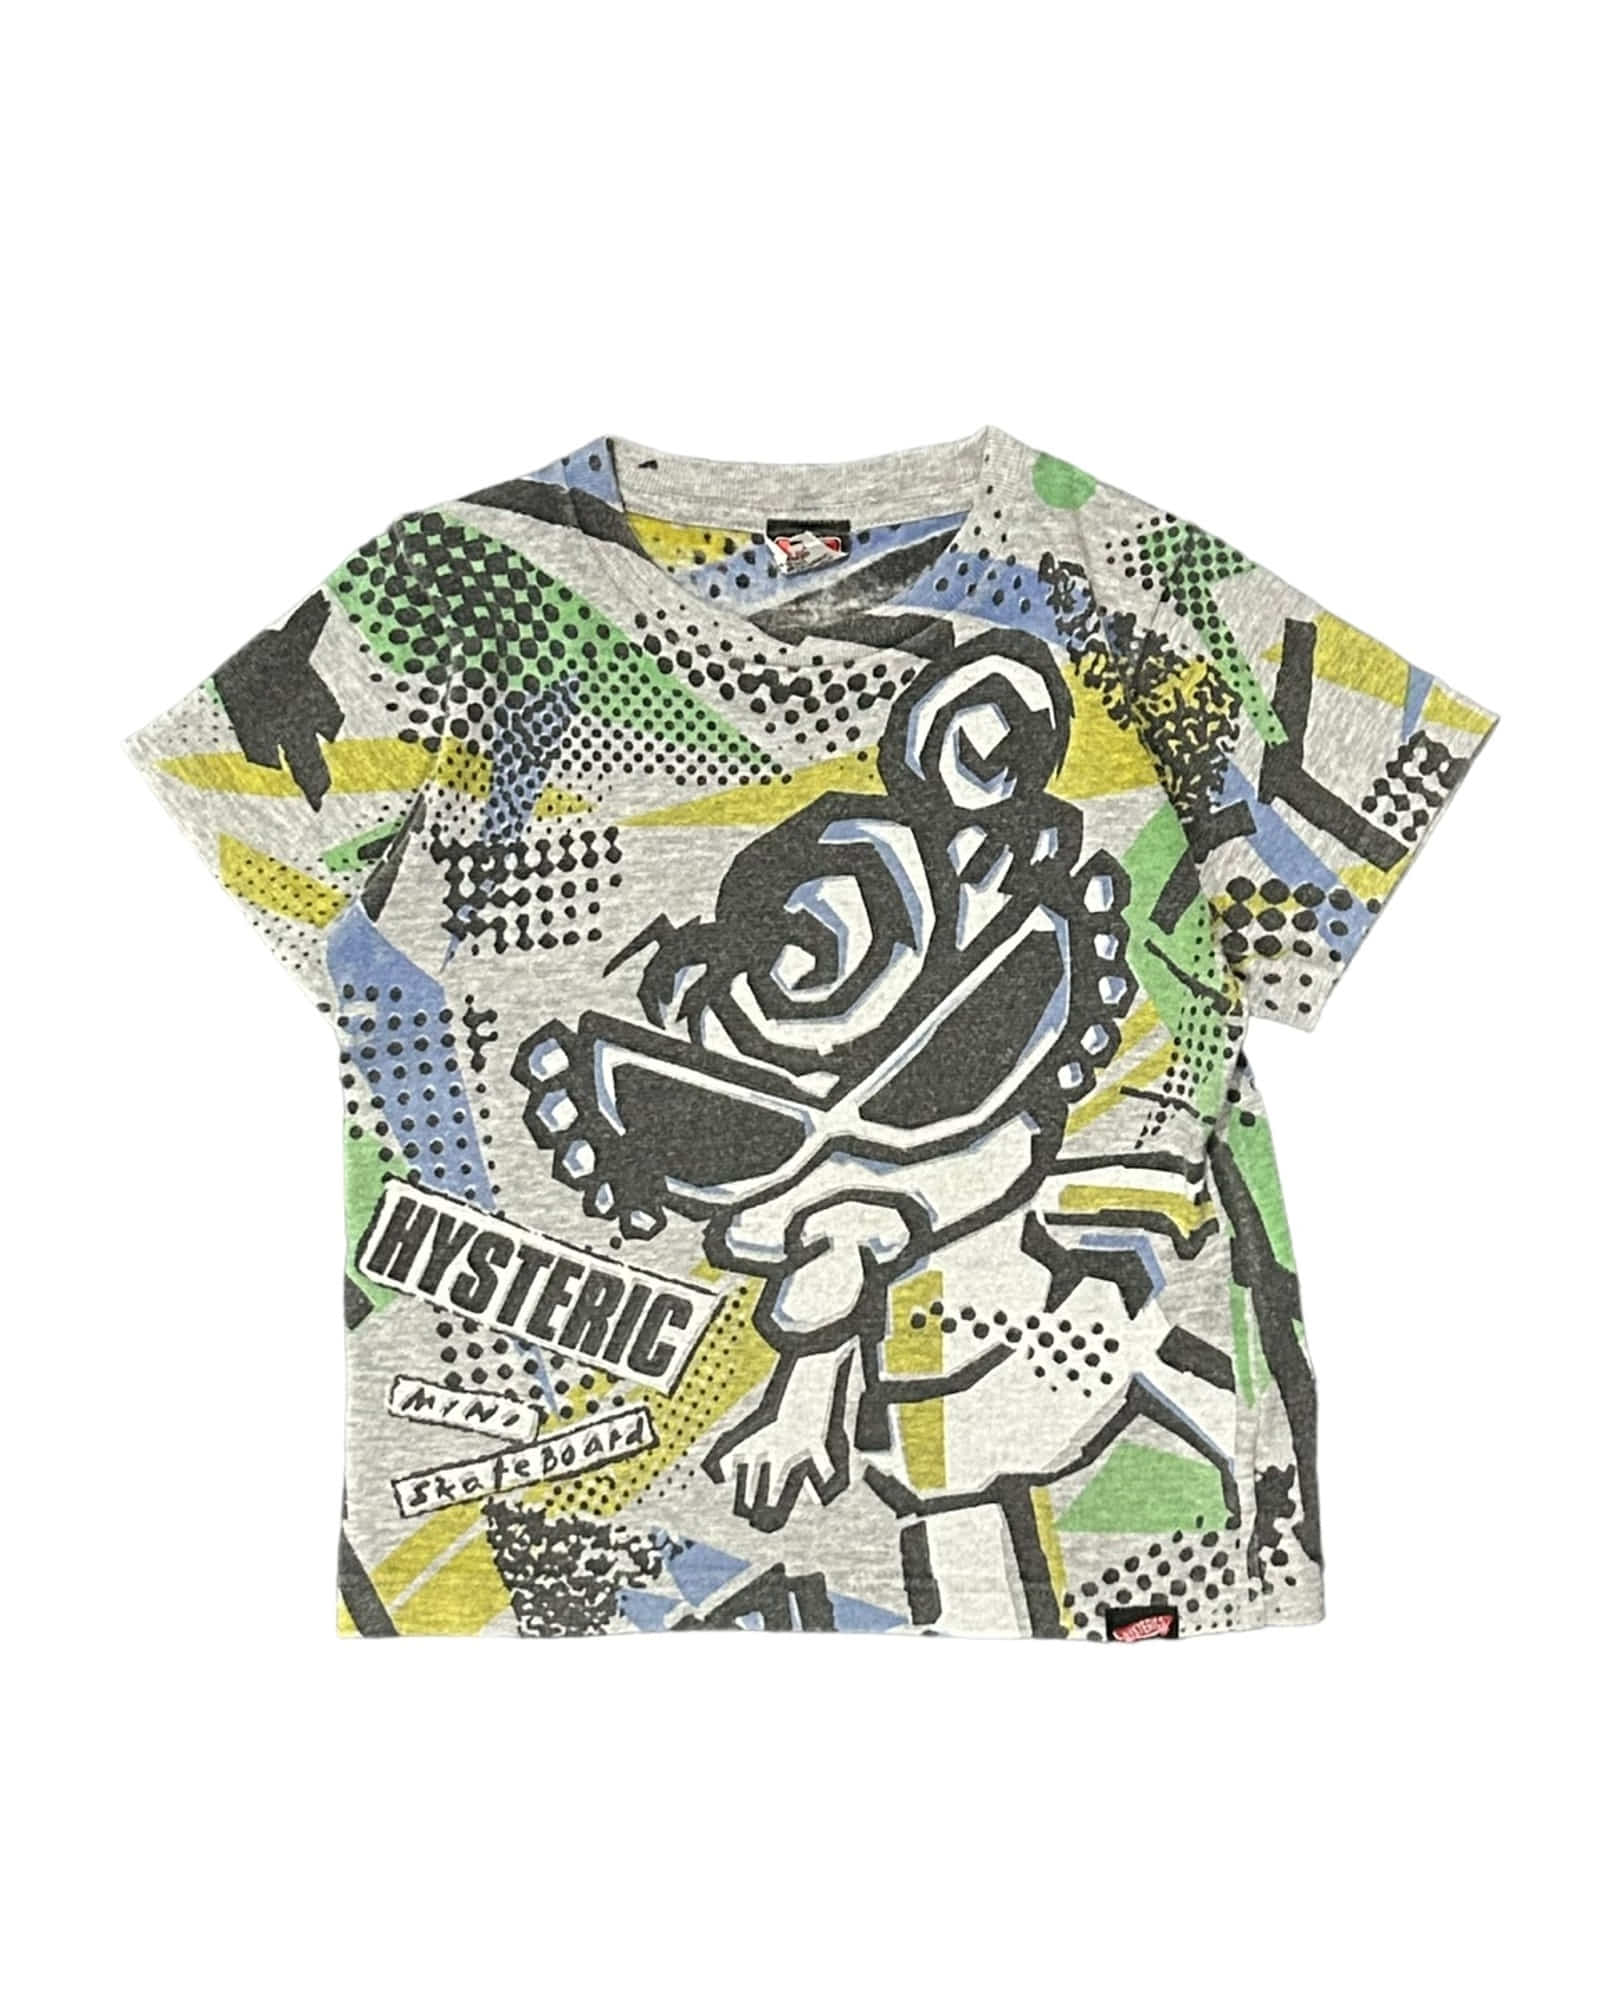 Hysteric Glamour MINI Crop T-S